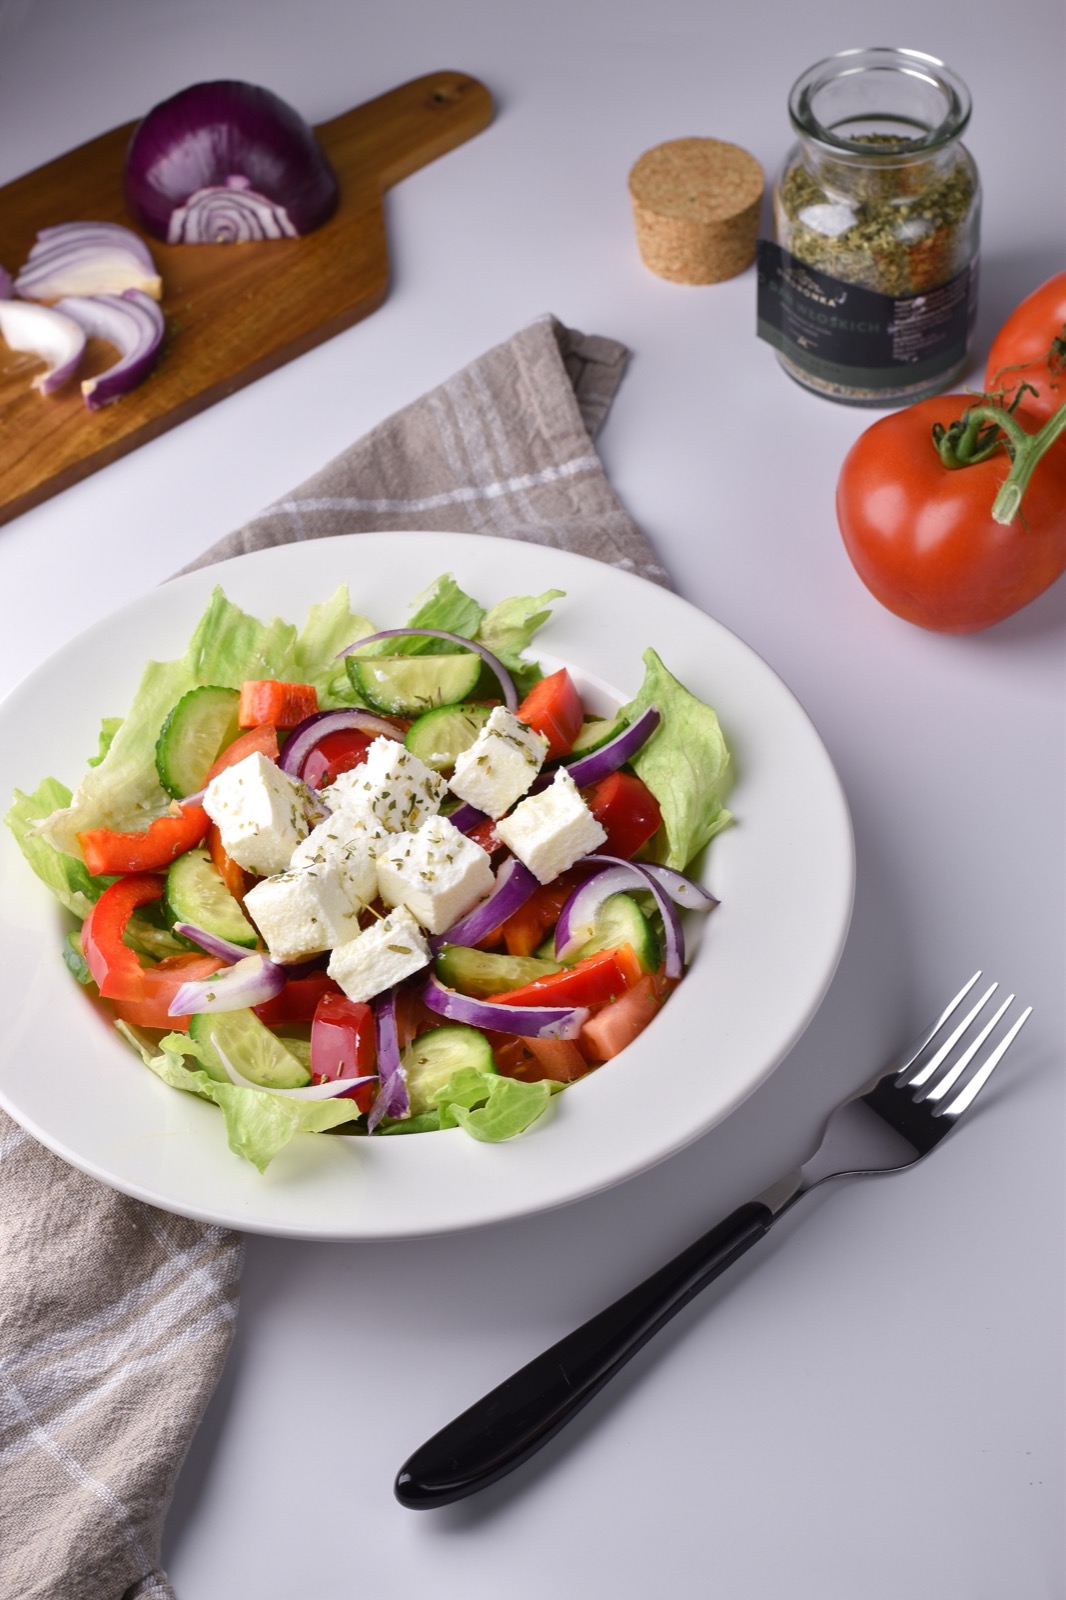 🍴 Design a Menu for Your New Restaurant to Find Out What You Should Have for Dinner Greek salad